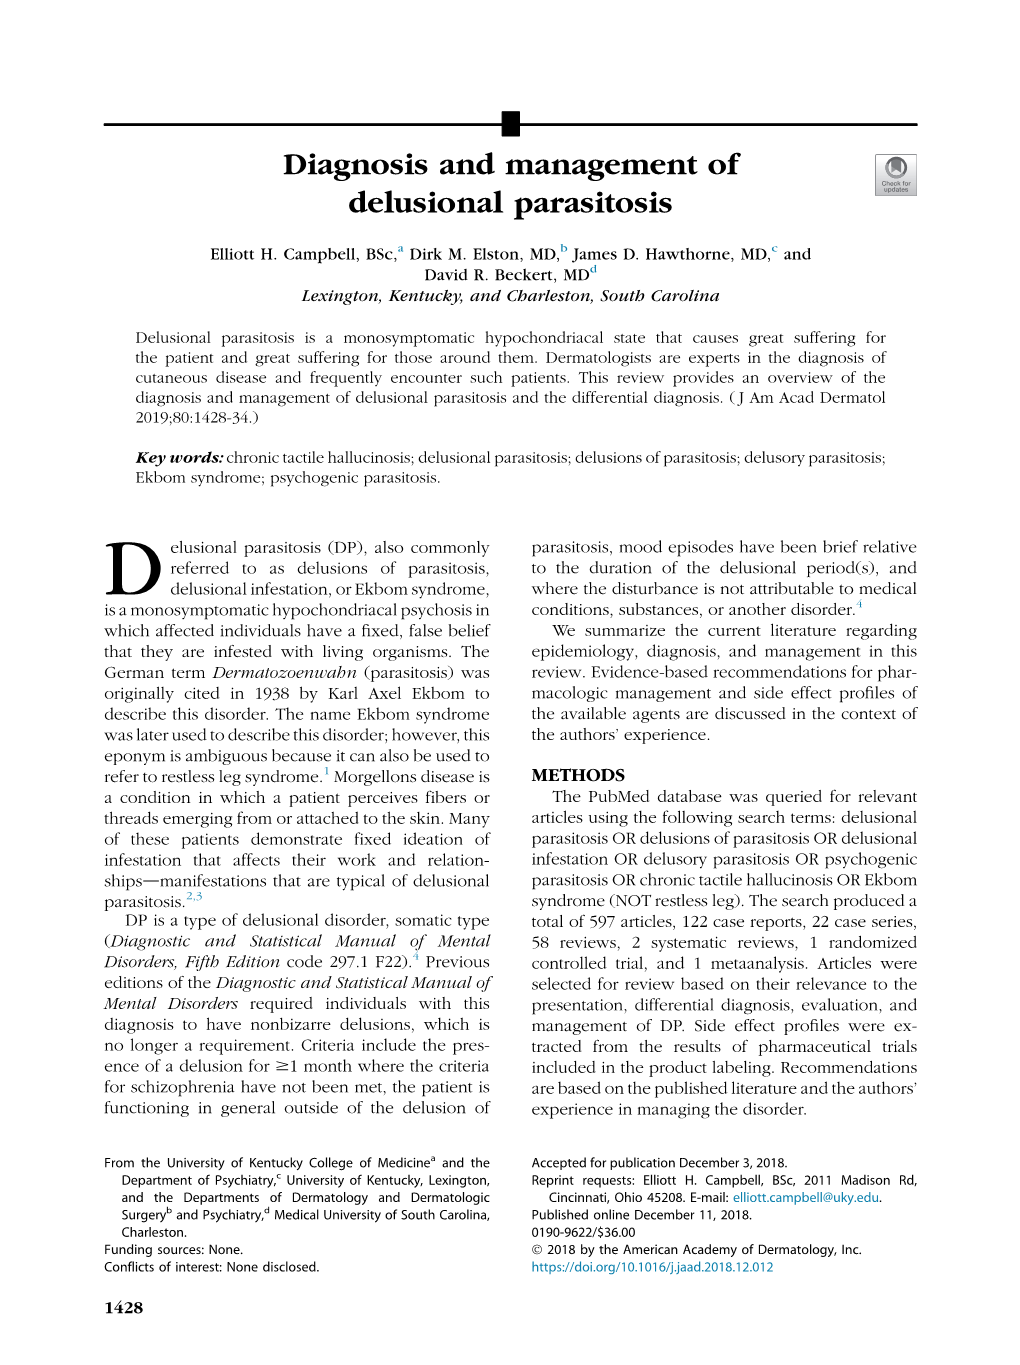 Diagnosis and Management of Delusional Parasitosis